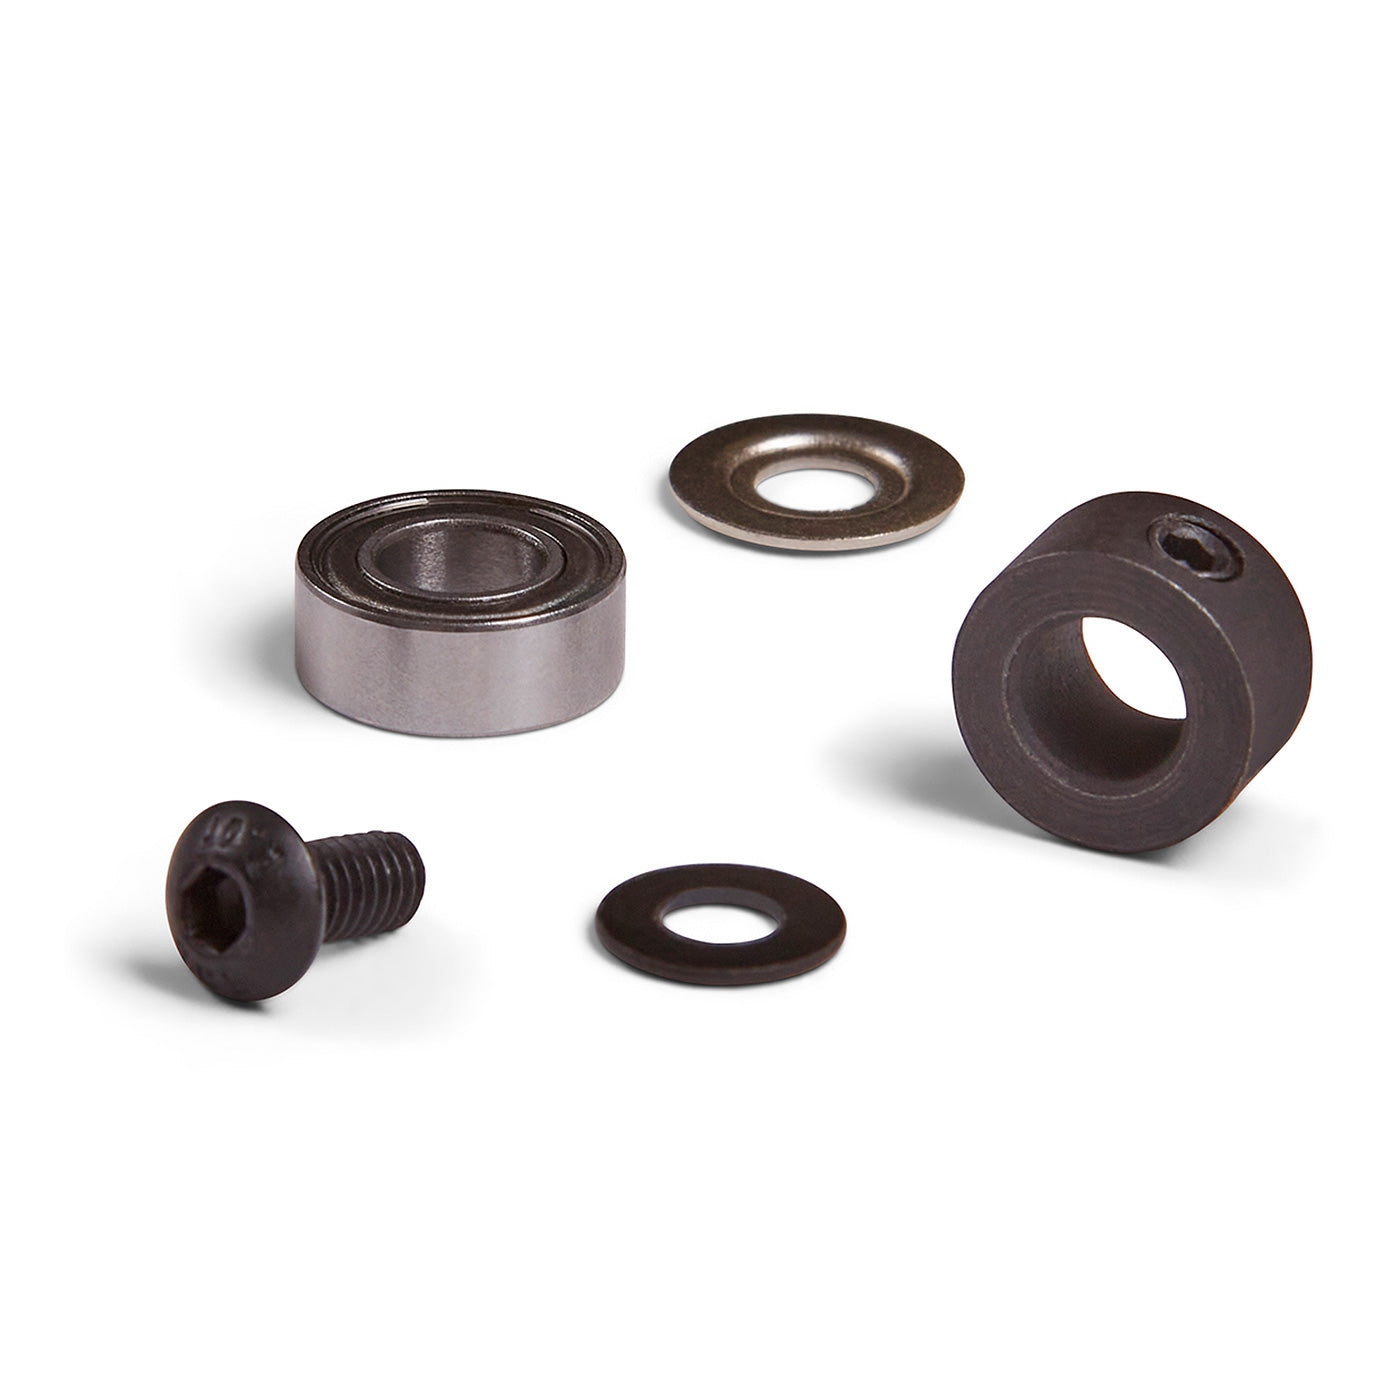 Bearing Kit for R5522, R5700, R5701 and R5712  